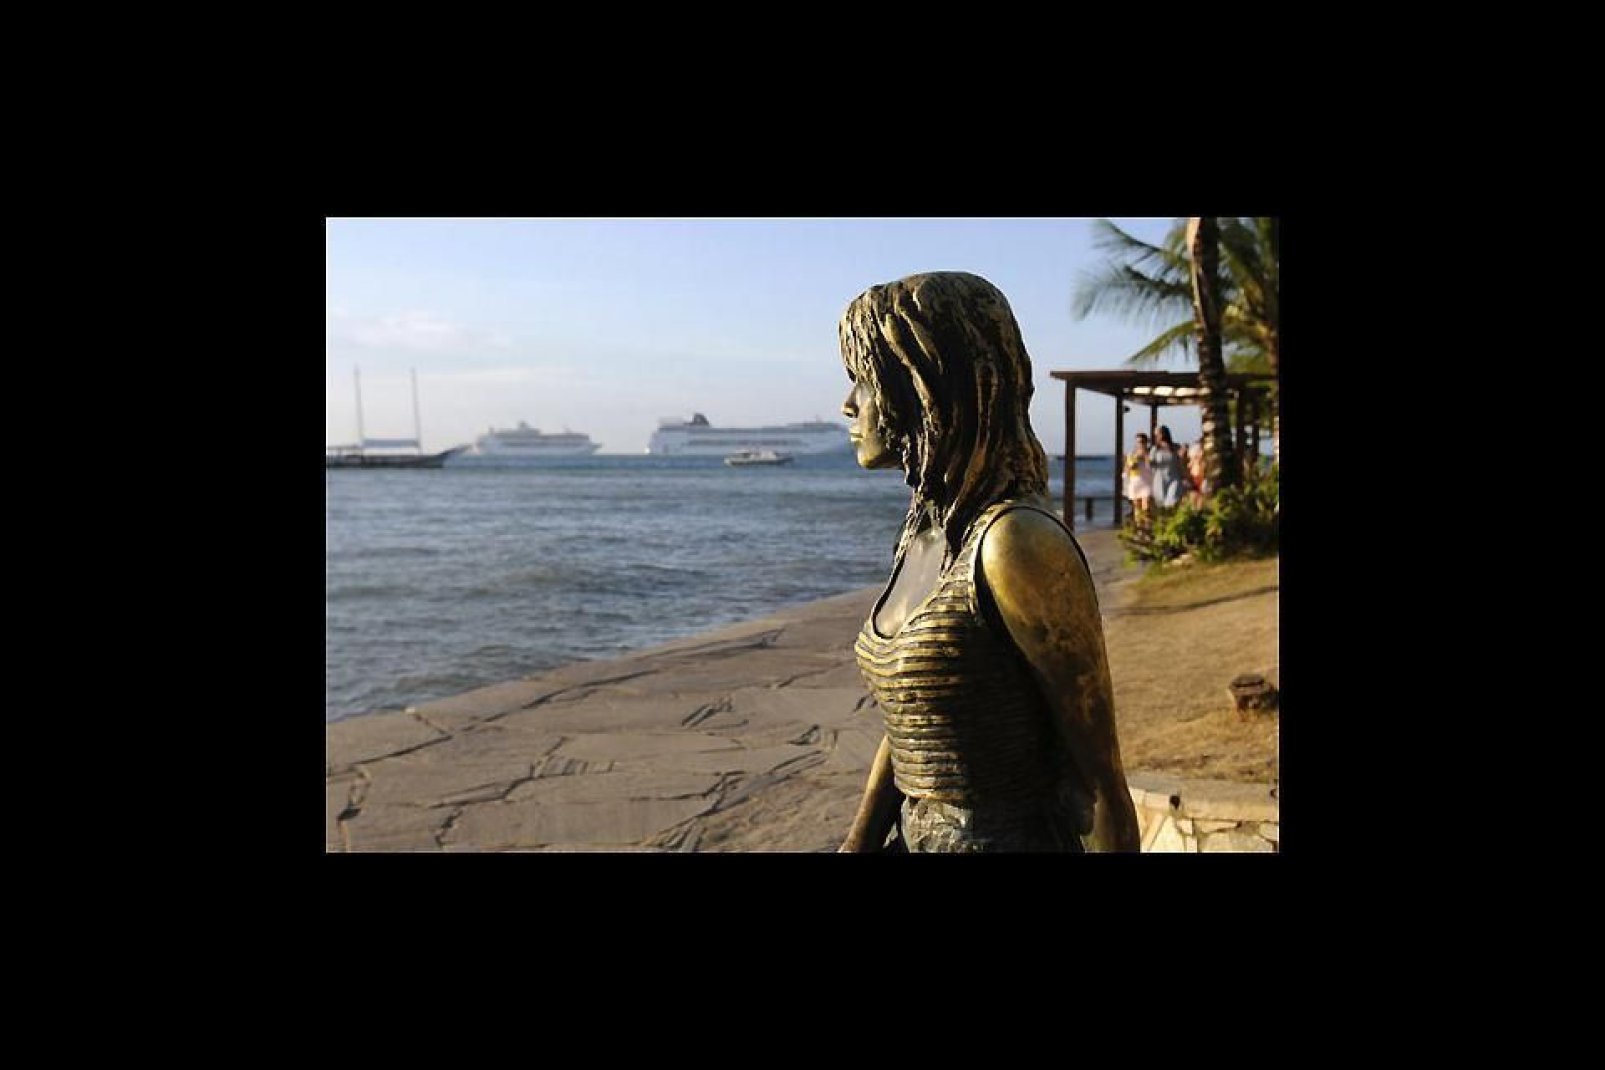 Tourists flock to the Orla Bardot to be photographed with the bronze statue of Brigitte Bardot.